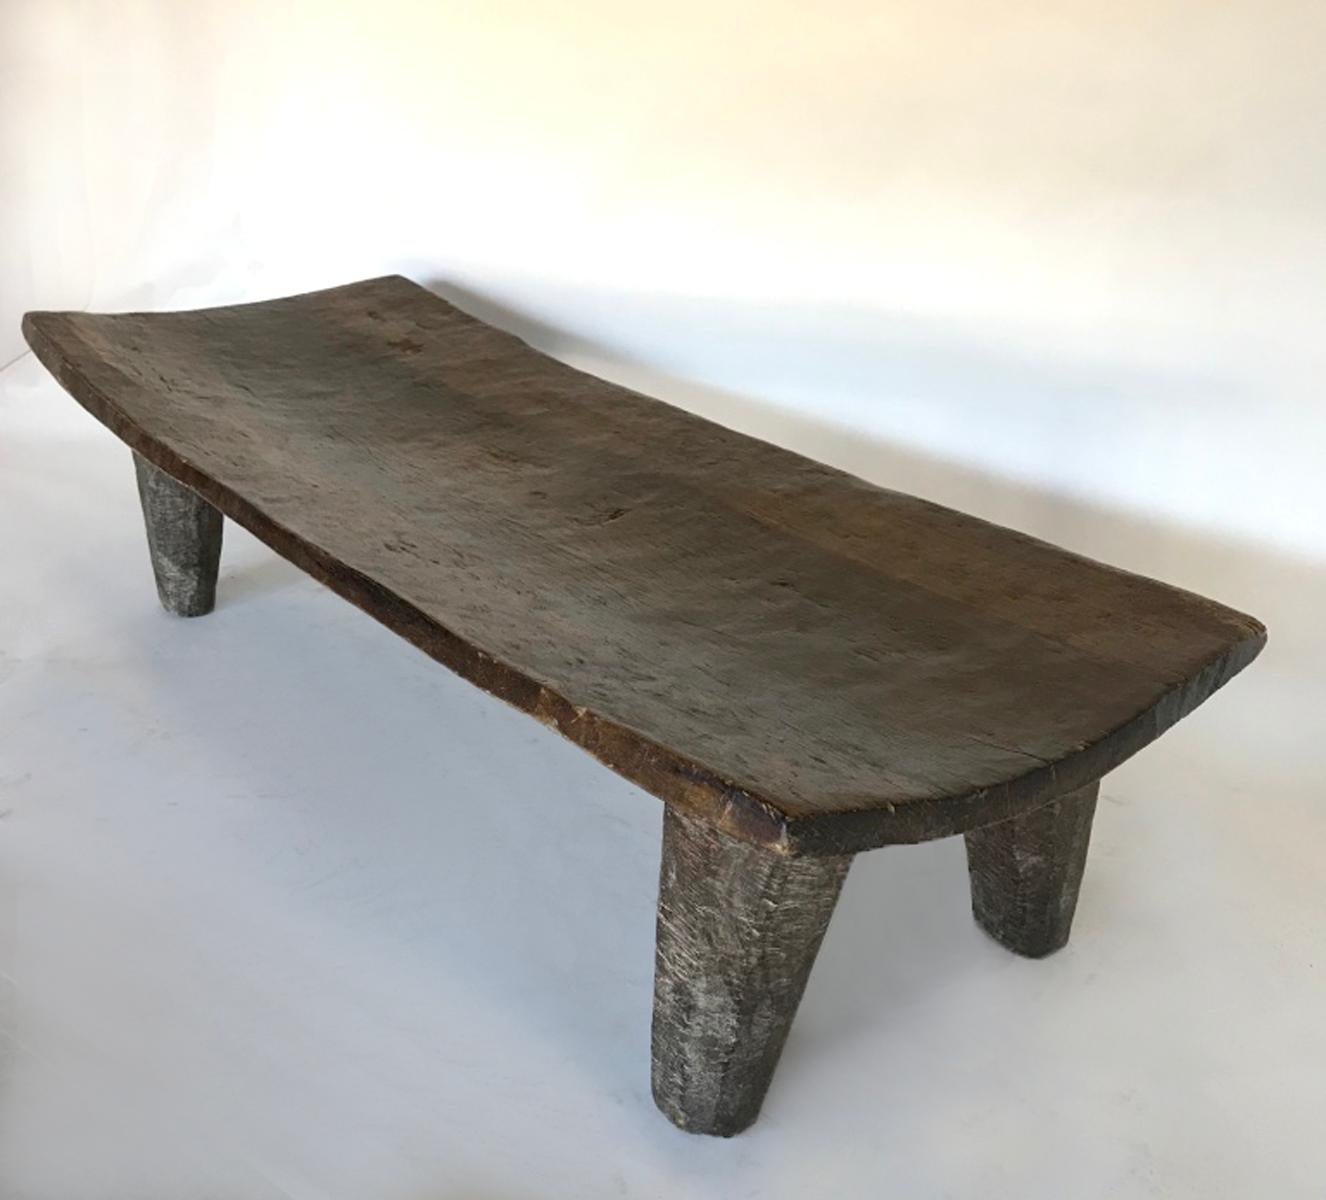 Carved out of one single piece of wood, this bed is from the Nupe tribe in northern Nigeria. Wonderful old patina throughout. Carved conical primitive legs. Great little coffee table, bench or low console under a piece of art.